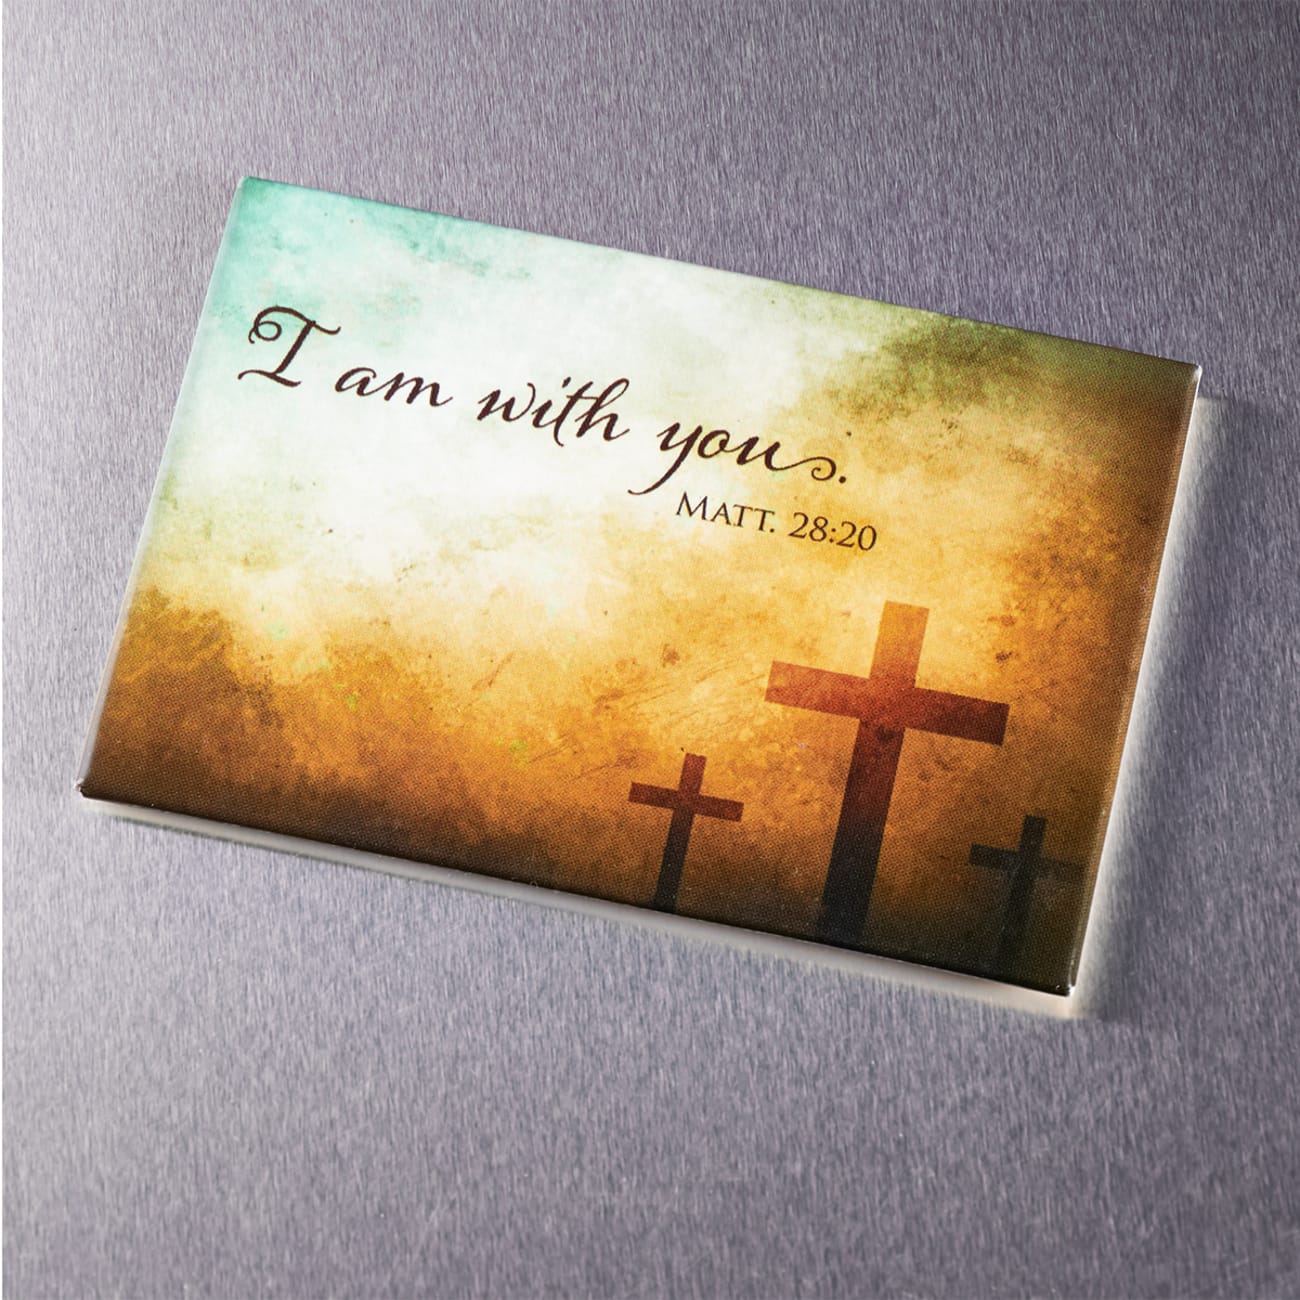 Magnet With a Message: I Am With You (Matt 28:20) Novelty